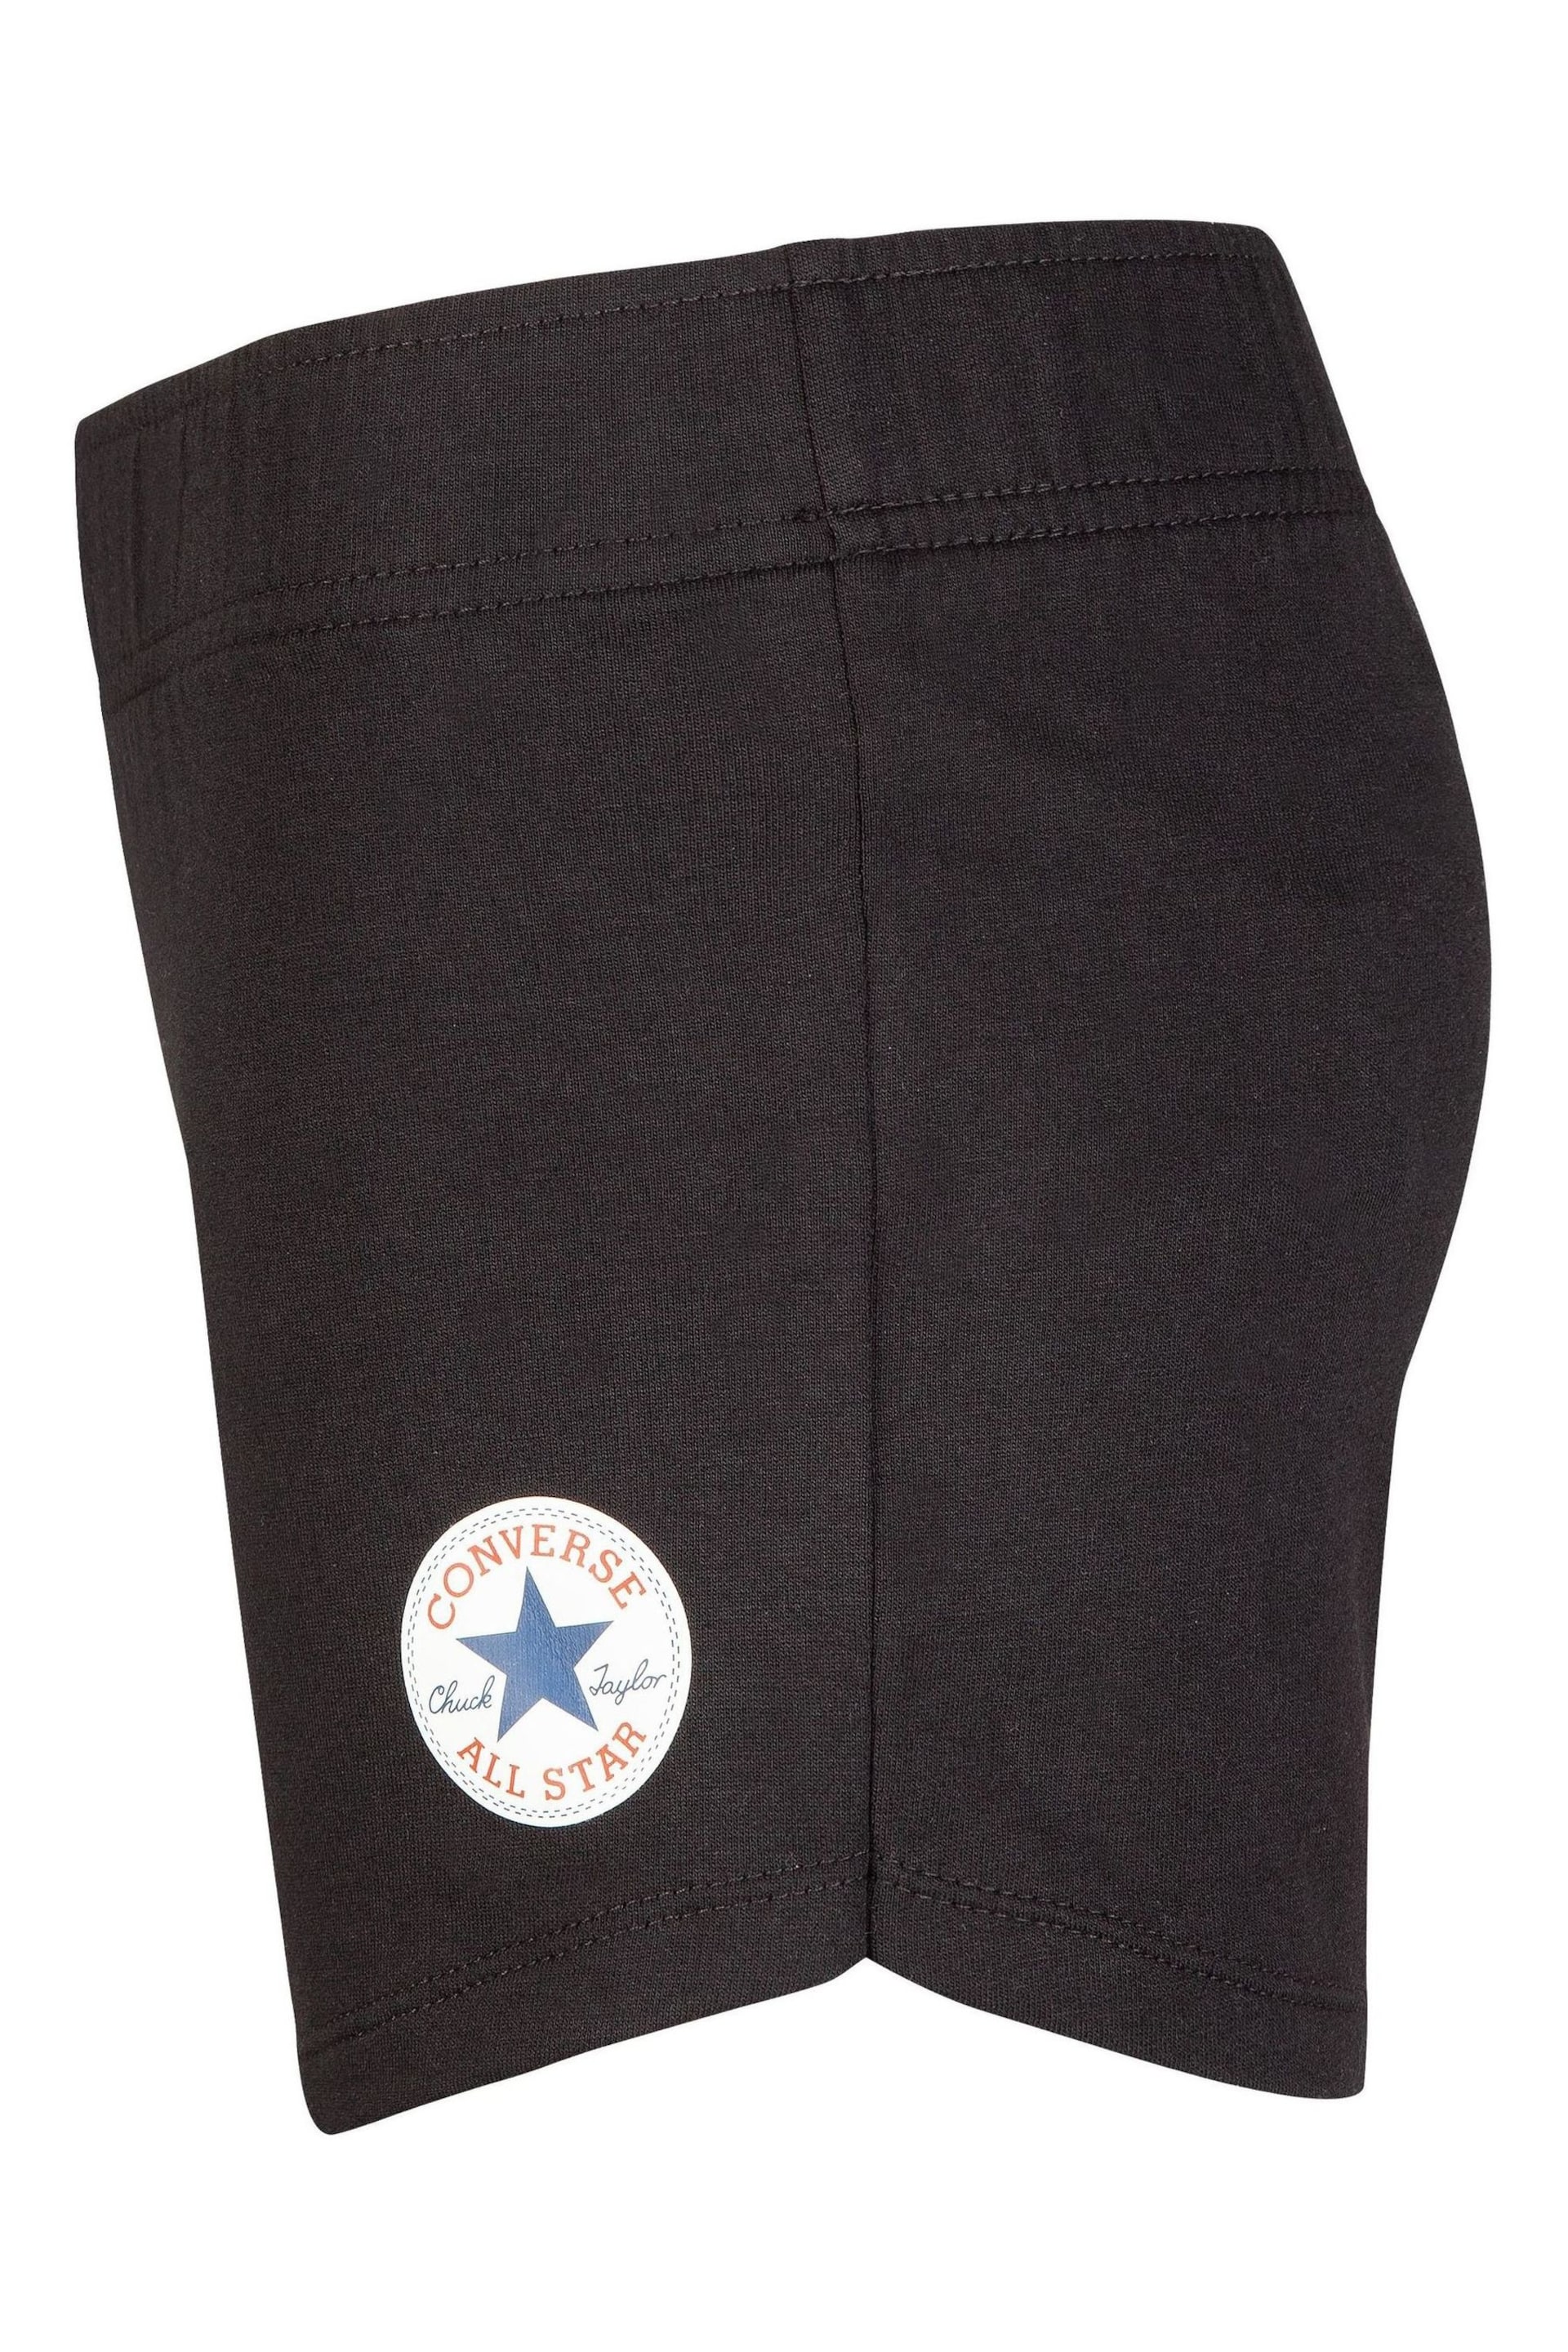 Converse Black Chuck Patch Shorts - Image 3 of 4